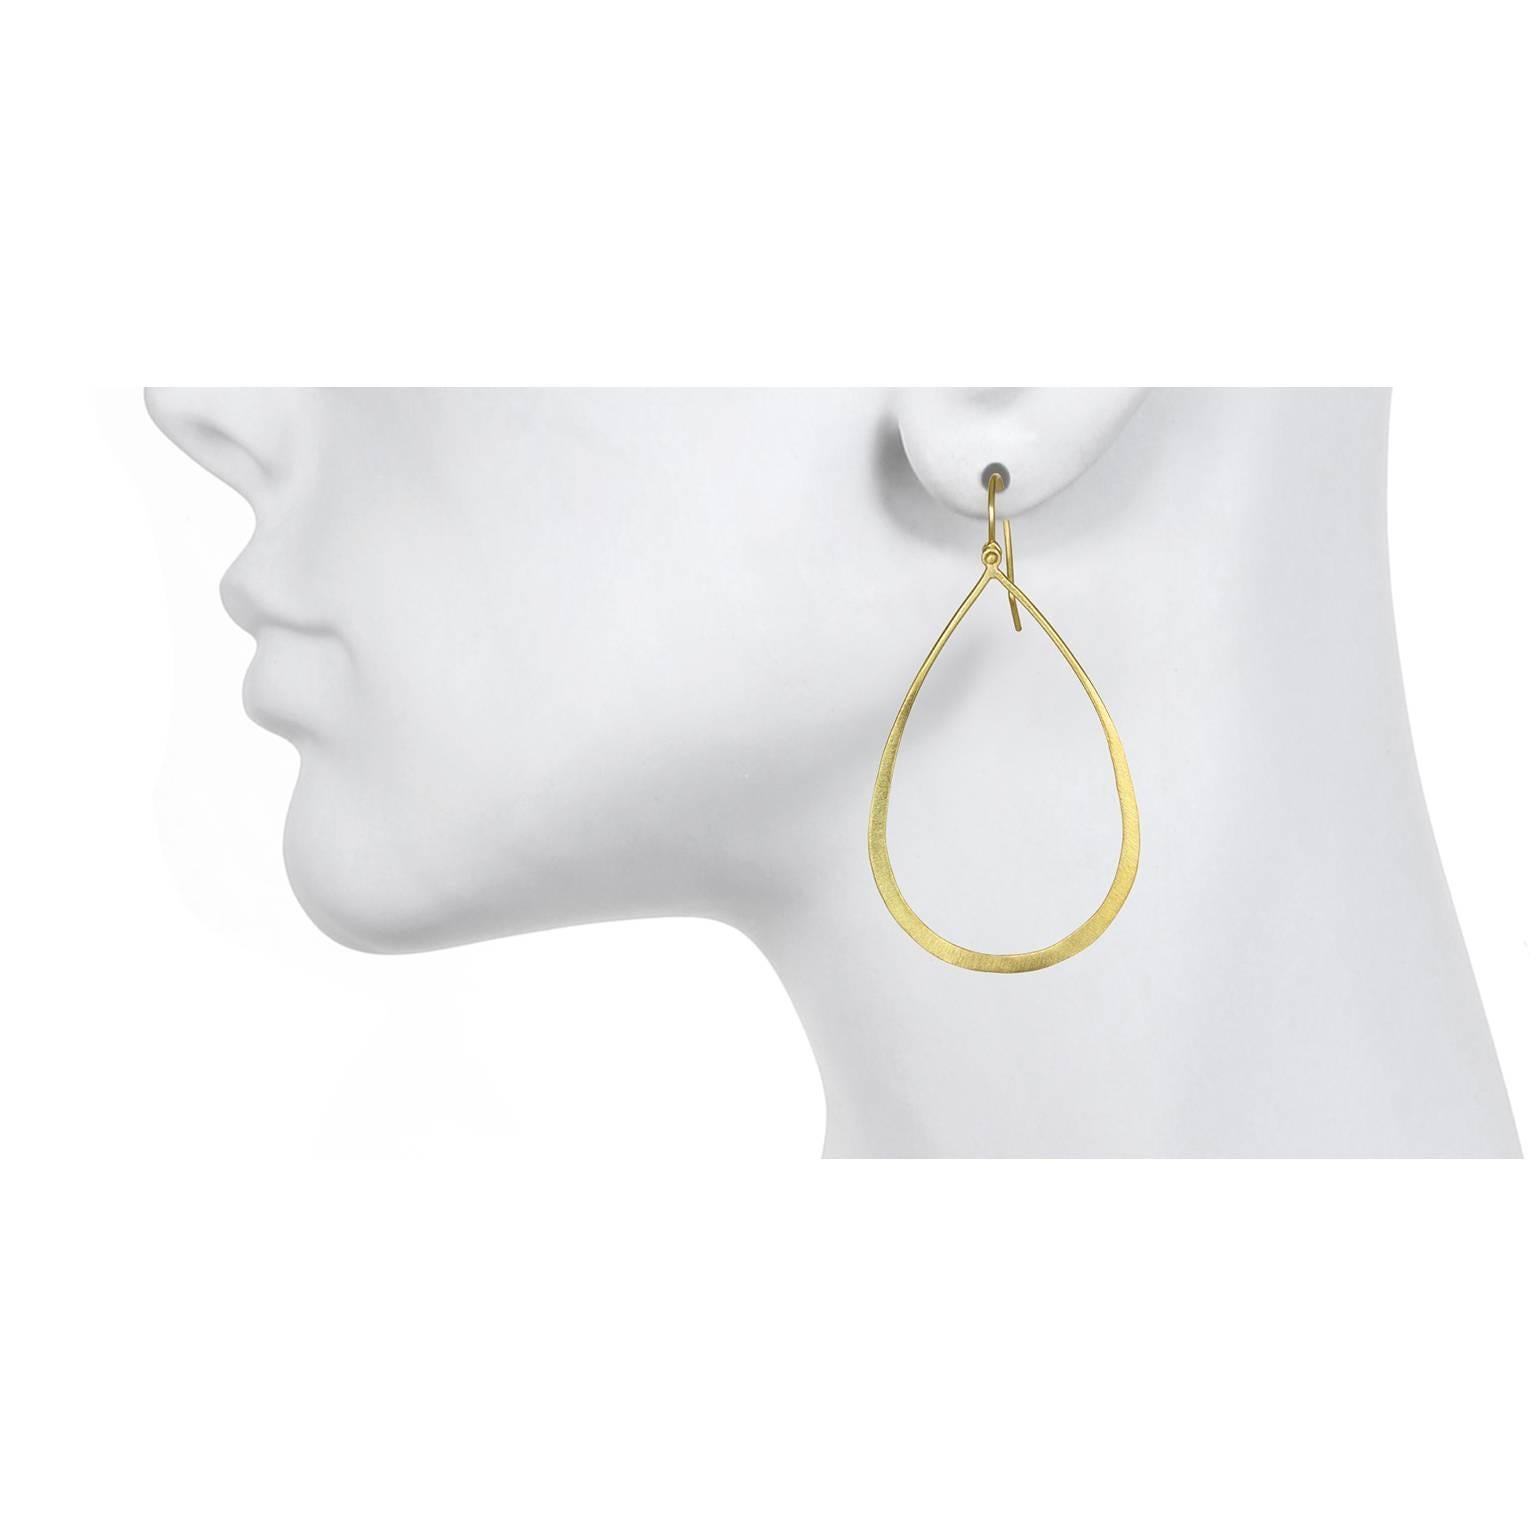 Handcrafted in 18k gold and planished for added texture, these teardrop earrings are a modern and fresh take on traditional gold hoops.  The granulation hinged ear wires add a special touch, making these earrings light and so easy to wear.  Total